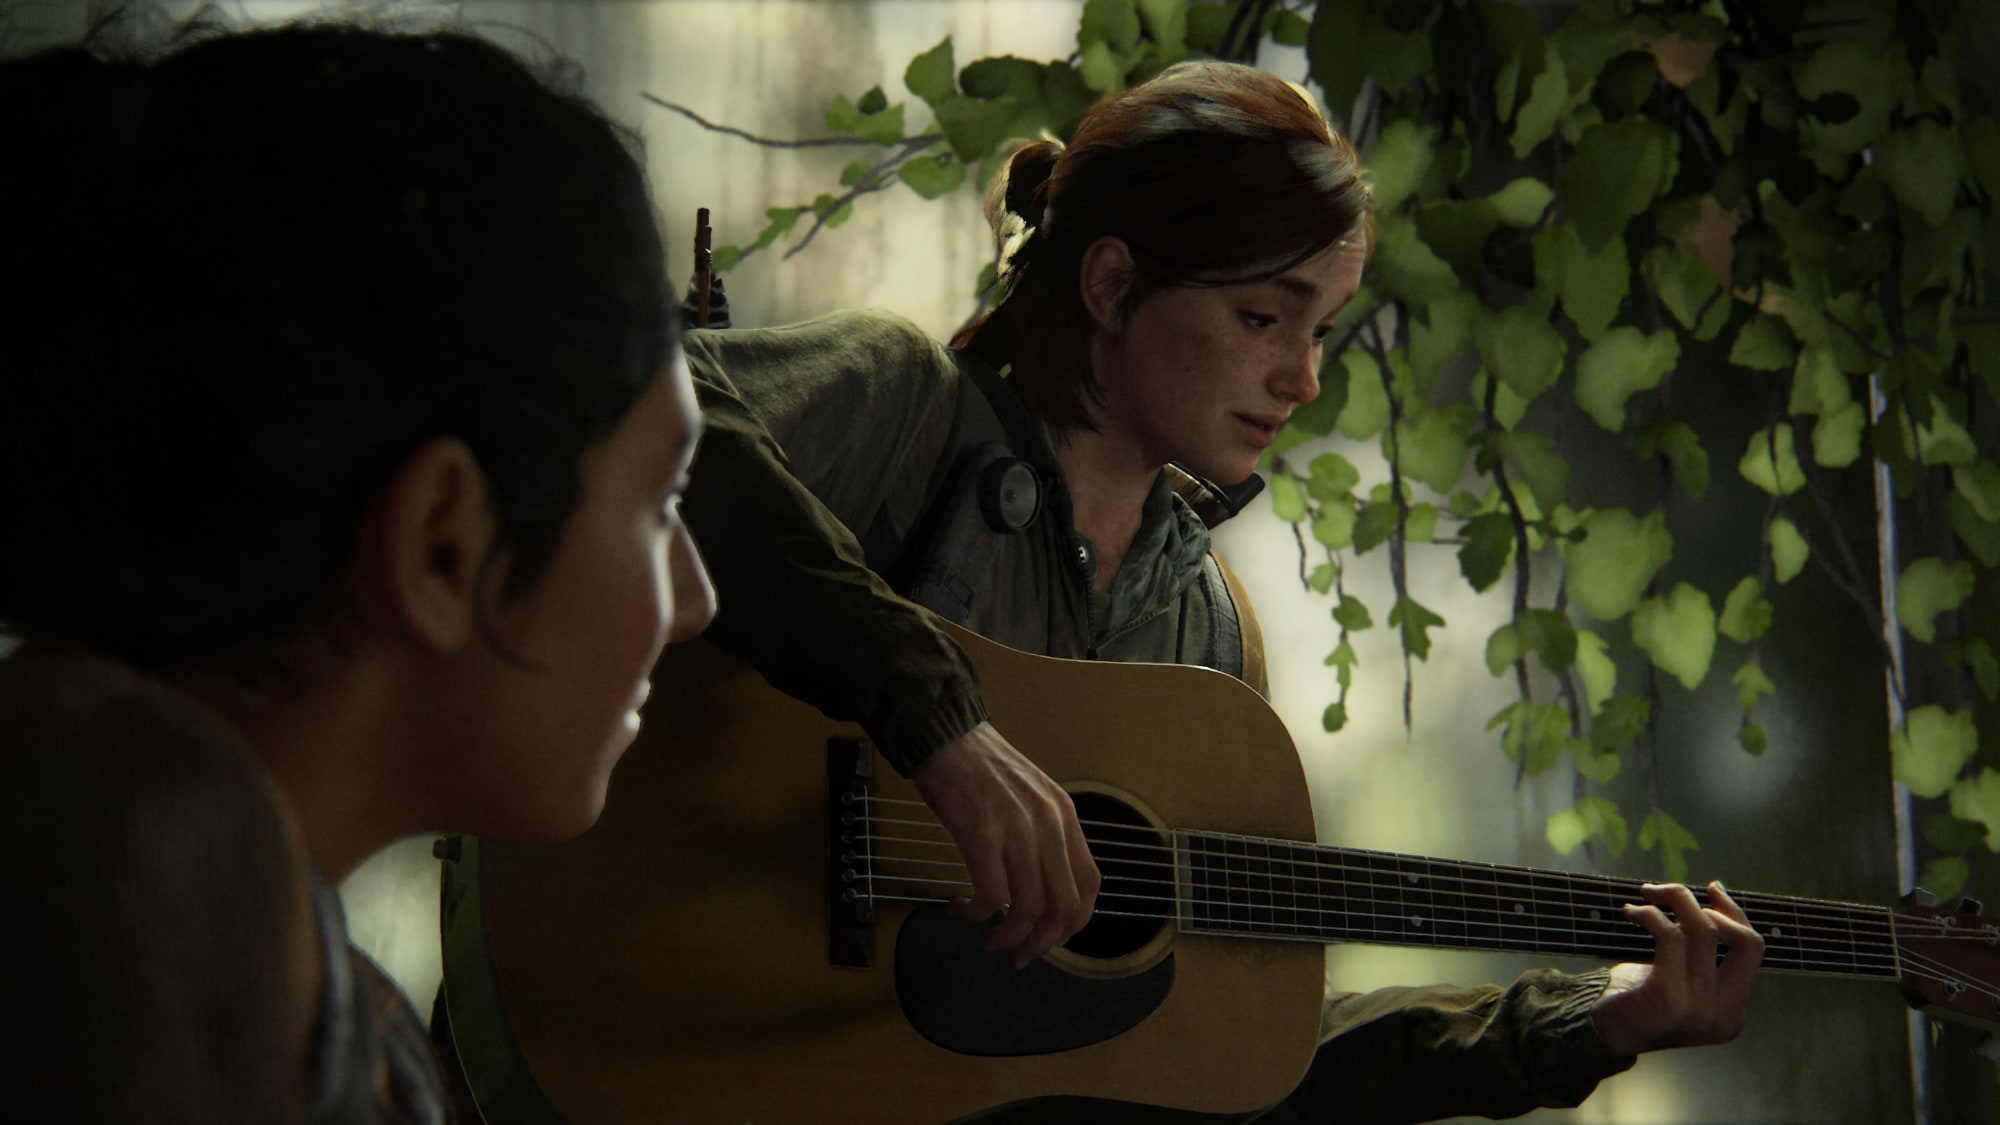 My favorite moment of The Last of Us Part II